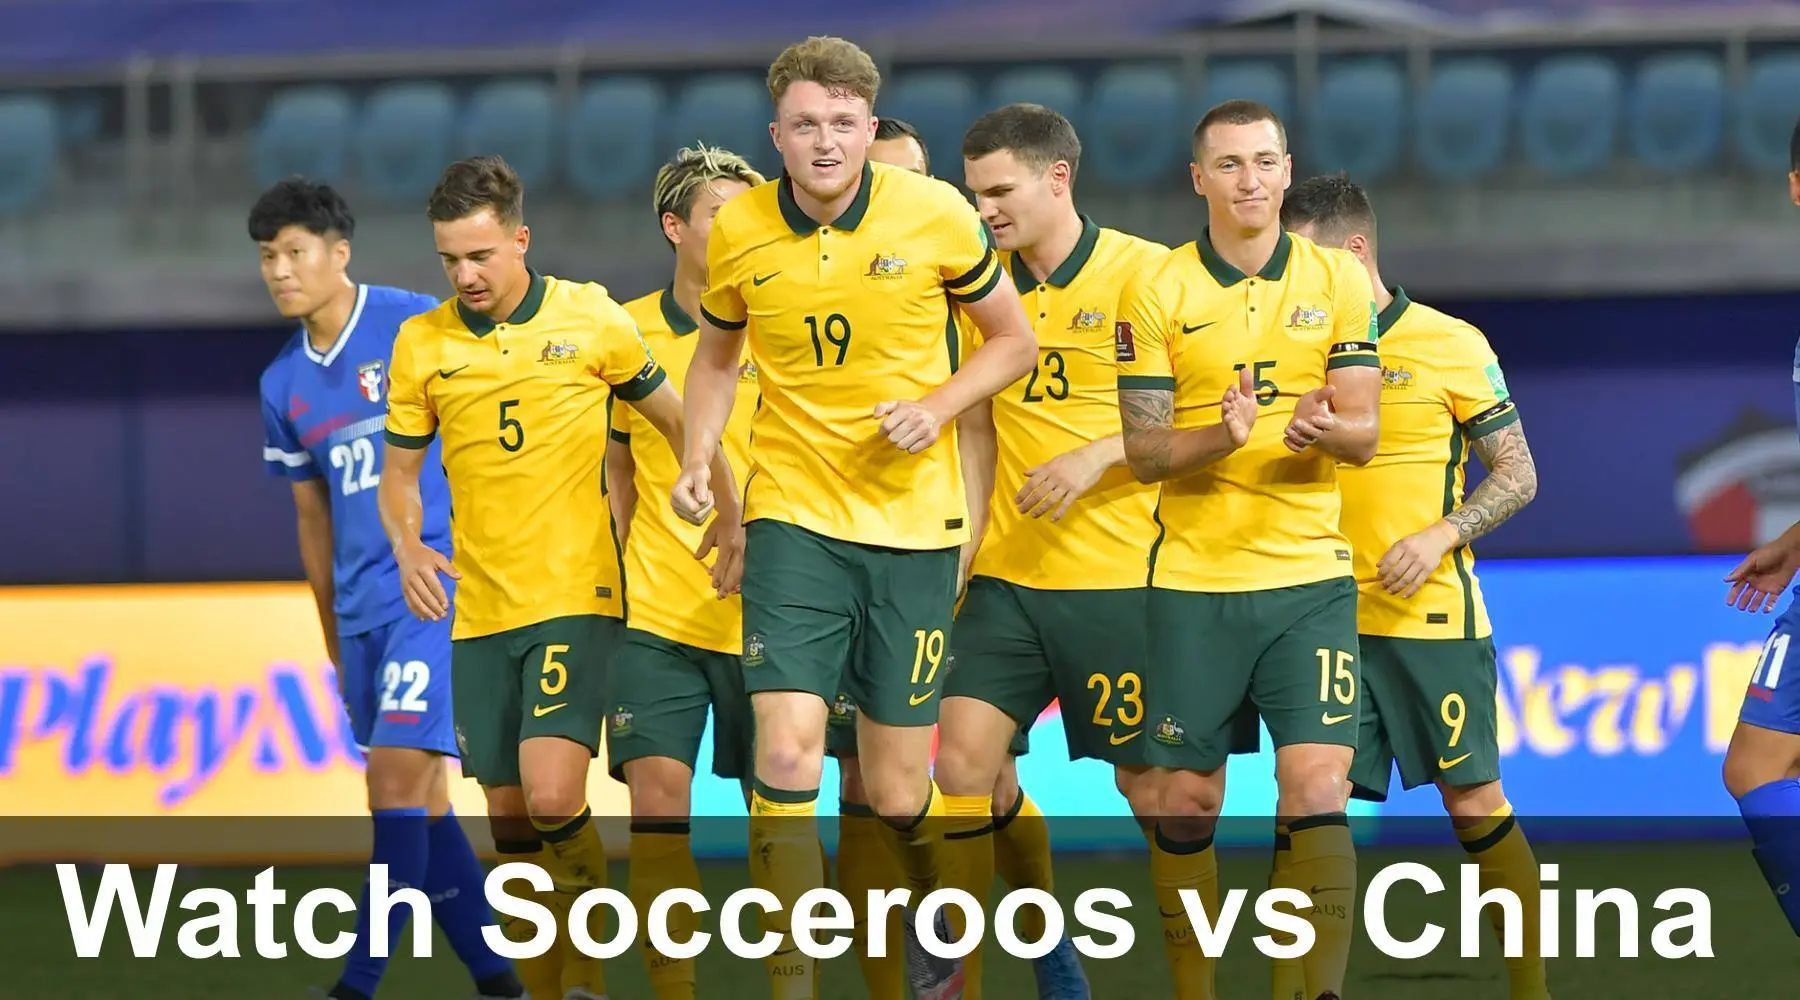 How to watch Socceroos vs China World Cup qualifier online